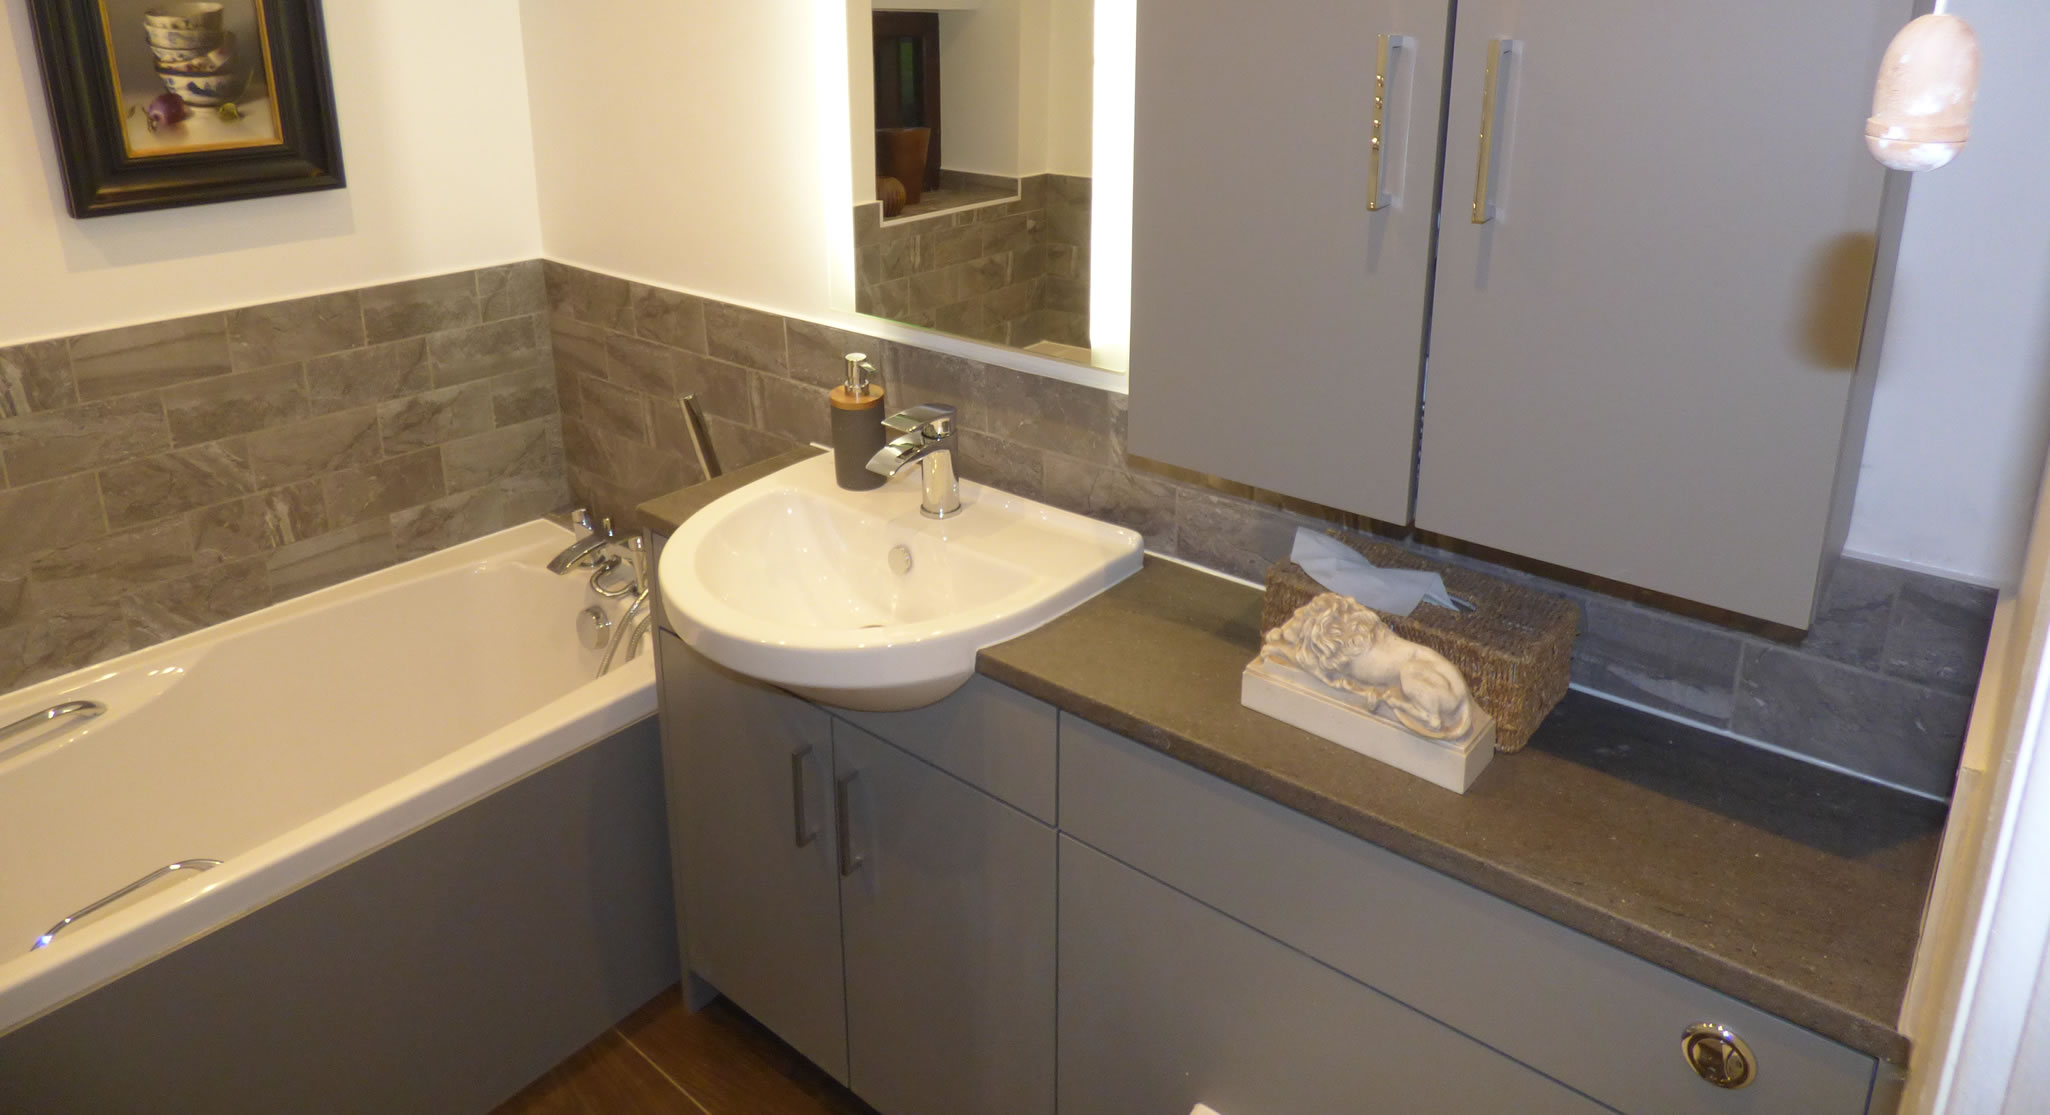 Verwood Kitchens and Bathrooms - Bathroom supply and fitting